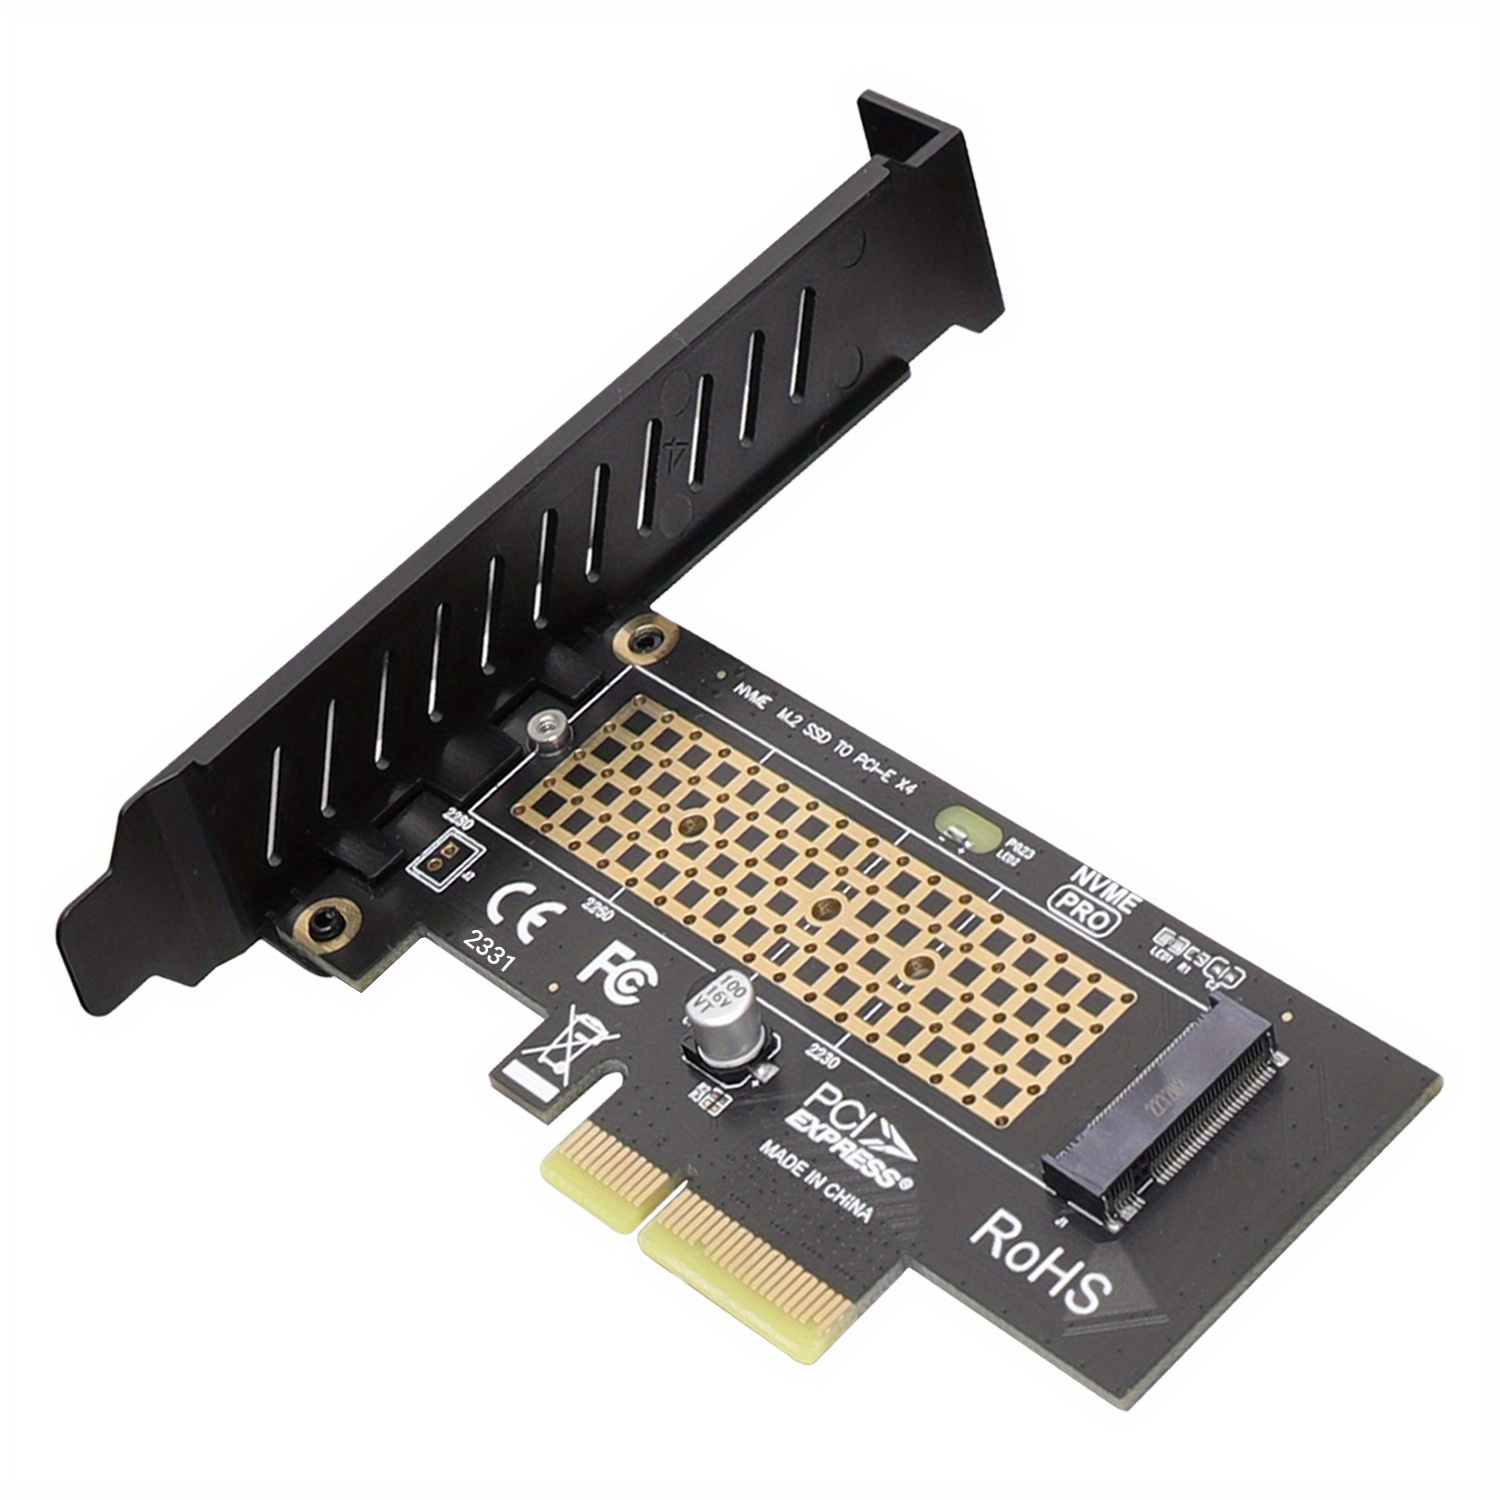 M.2 NVME SSD PCIe 4.0 Adapter